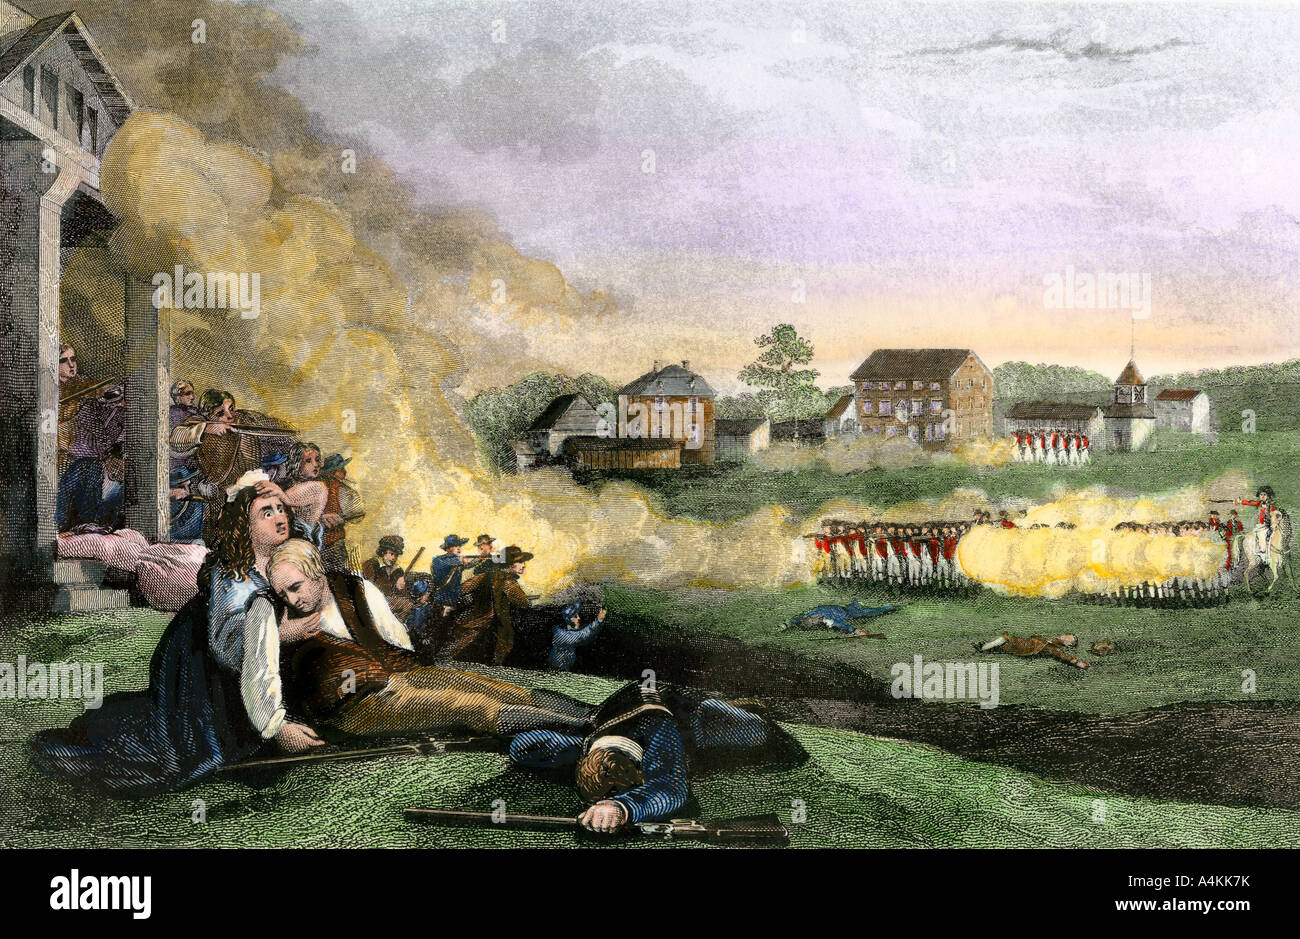 Wife holding her dying husband at the Battle of Lexington start of the Revolutionary War April 1775. Hand-colored steel engraving Stock Photo